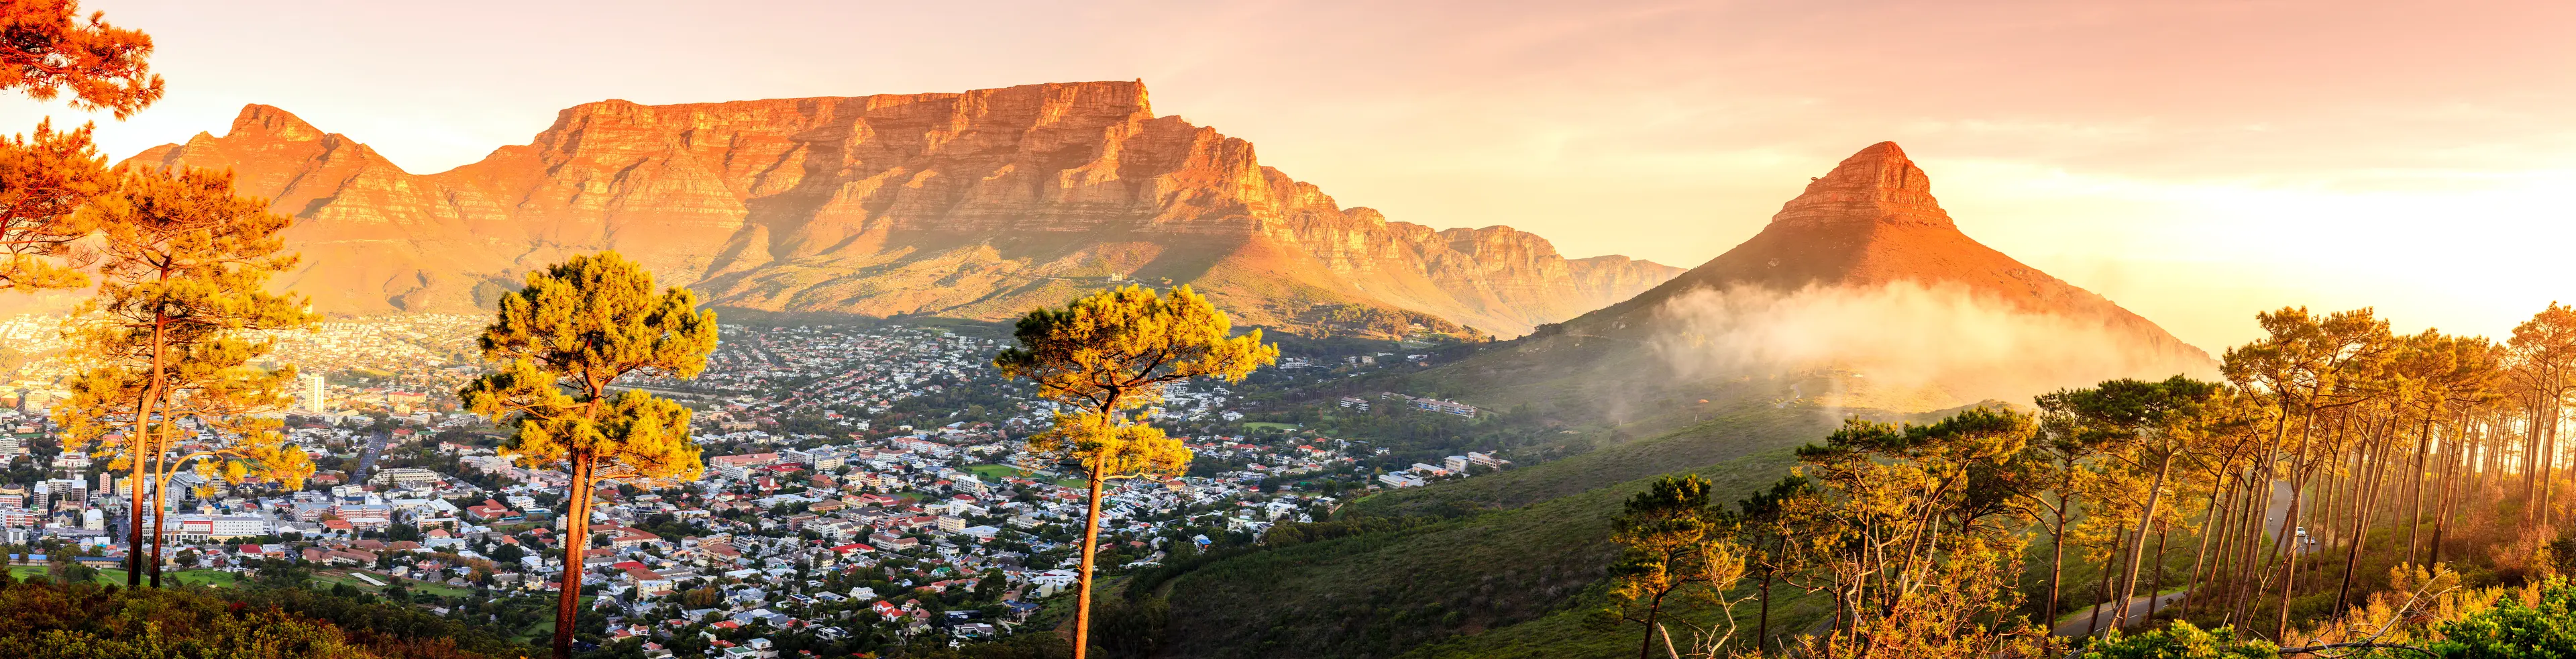 Romantic Cape Town: A Local's One-Day Food, Wine and Relaxation Guide